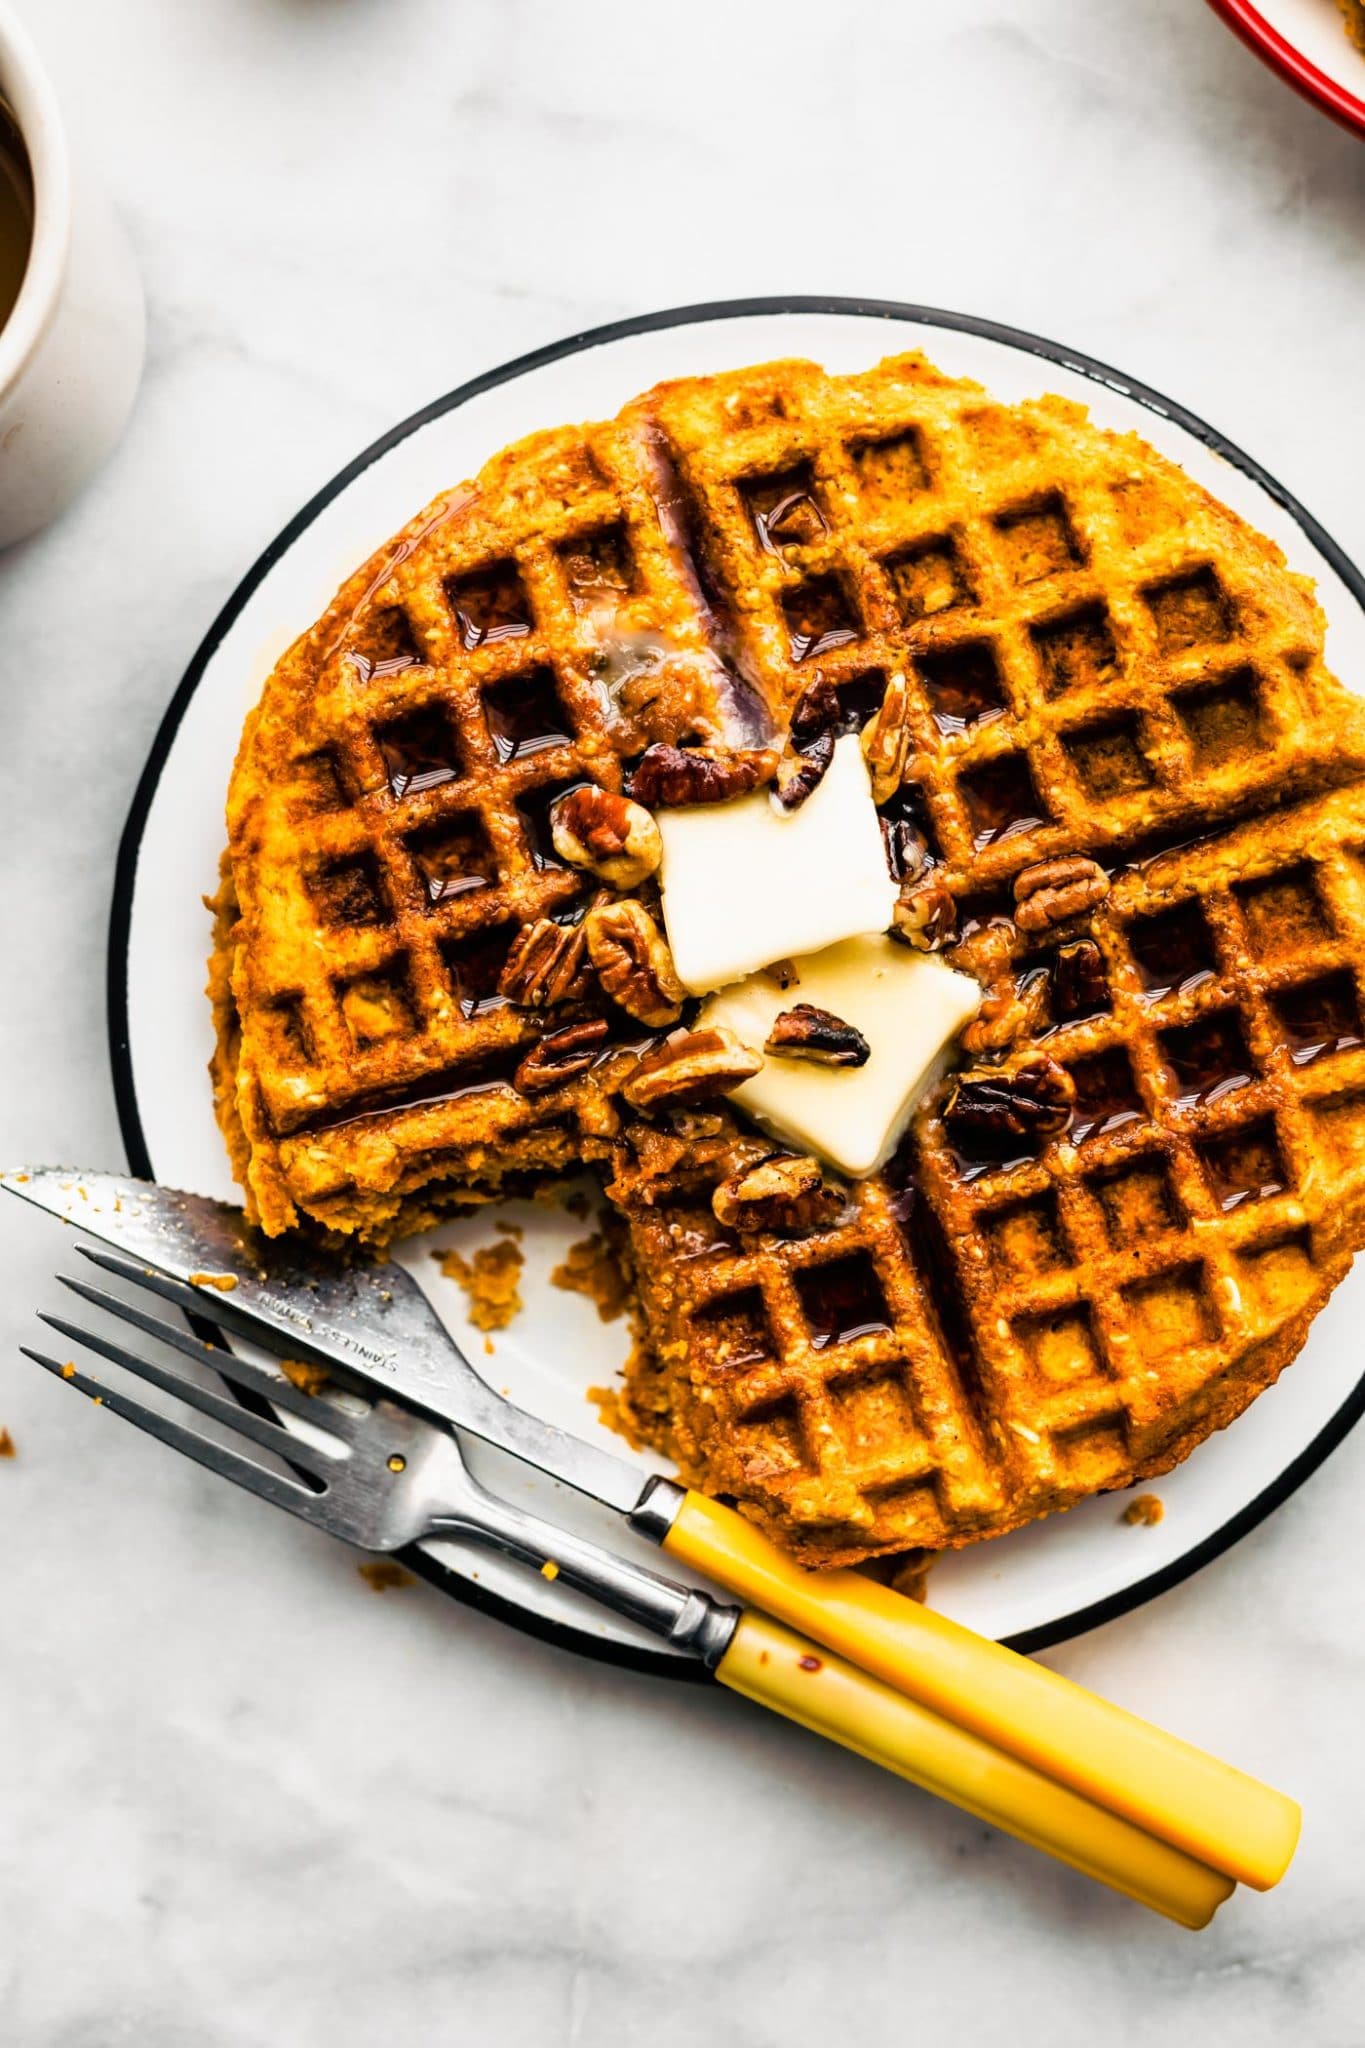 Gluten free sweet potato waffle with a bite taken out topped with butter on a plate with a knife and fork